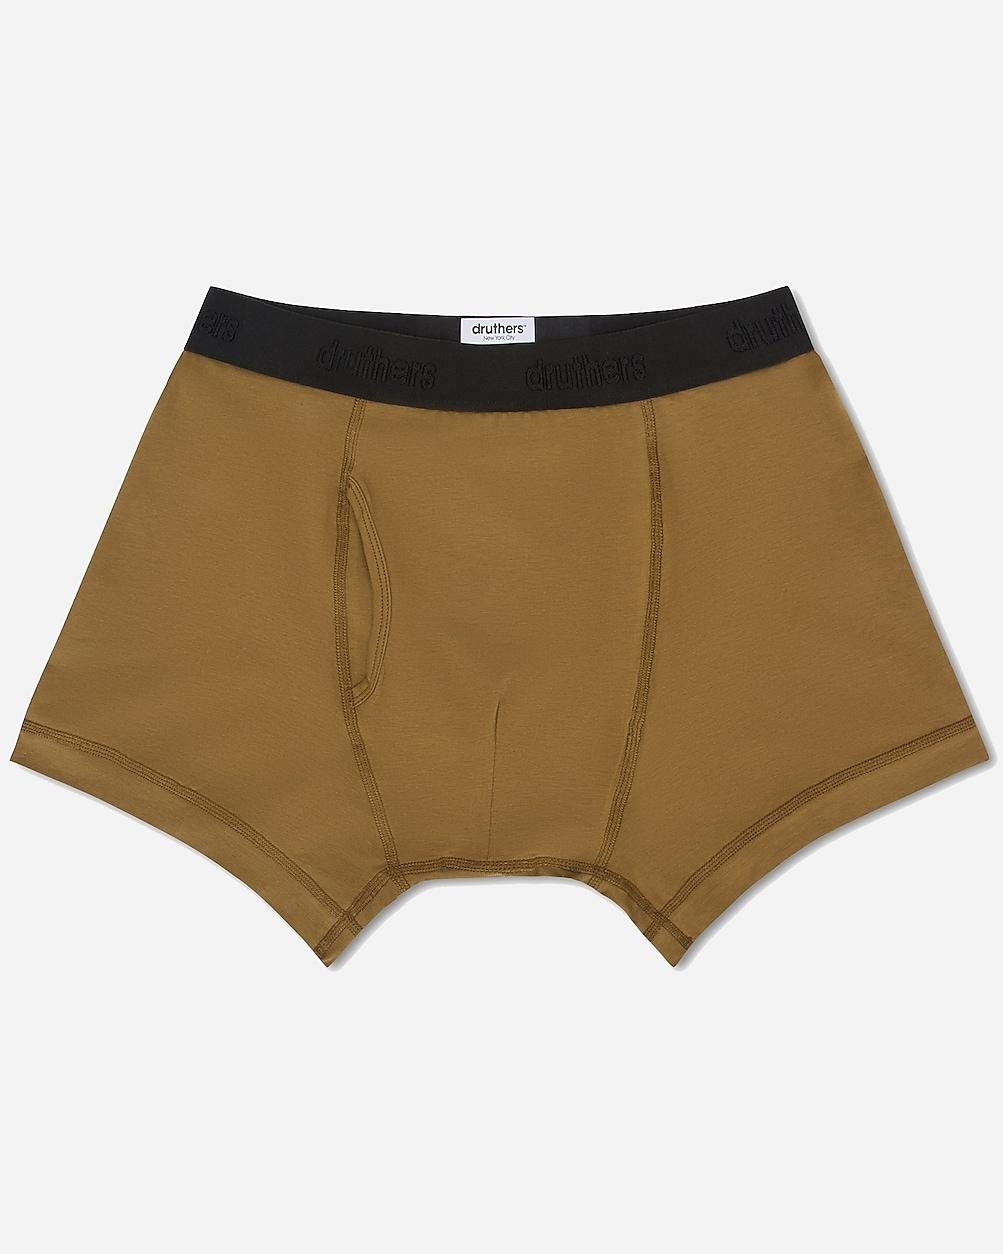 Druthers™ stretch organic cotton-blend boxer briefs by J.CREW